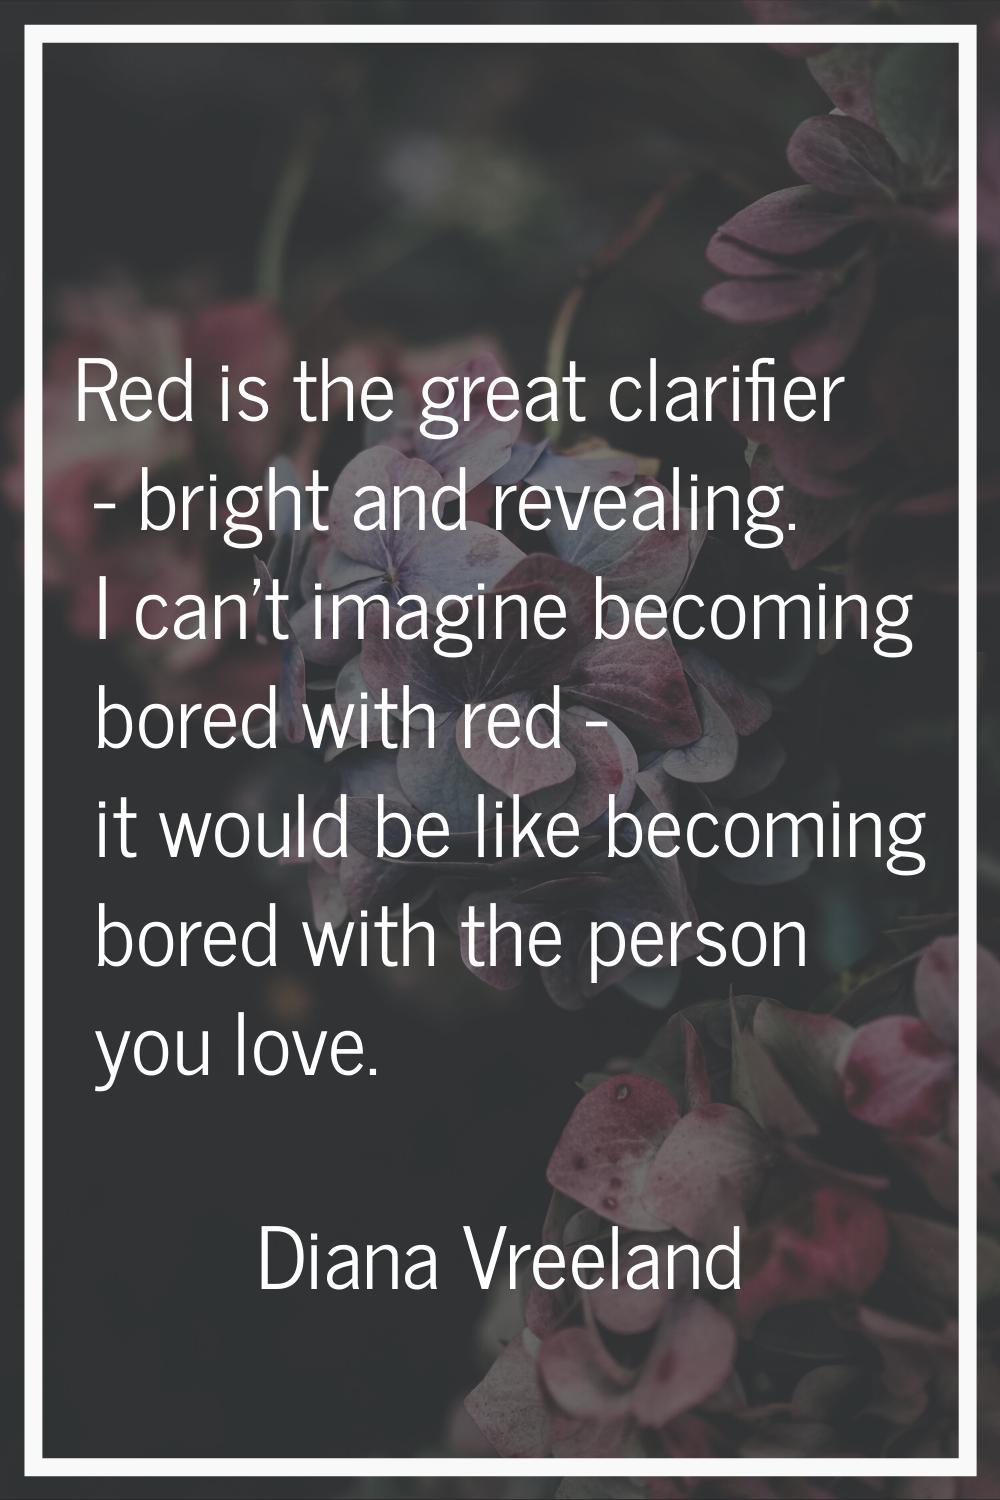 Red is the great clarifier - bright and revealing. I can't imagine becoming bored with red - it wou